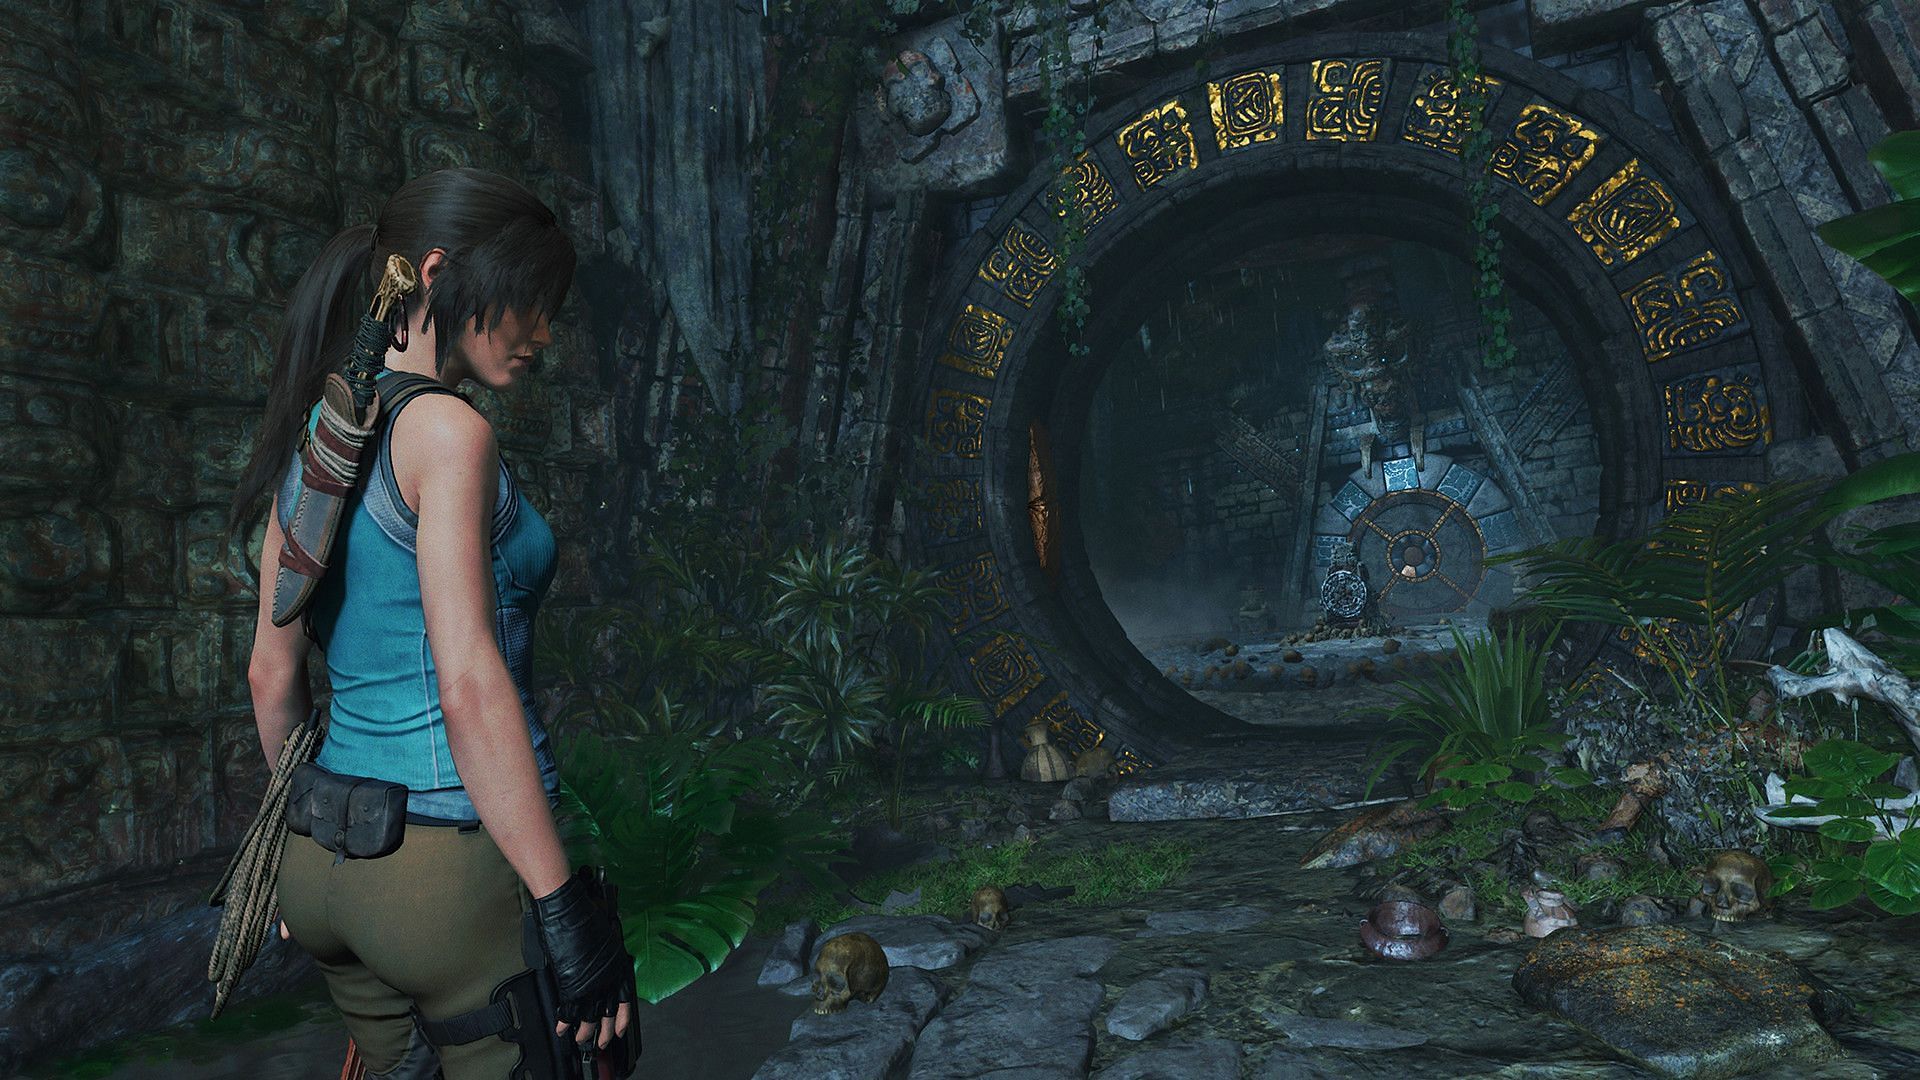 In the Tomb Raider trilogy, Lara Craft must defeat enemies, and solve mysteries and puzzles in a dazzling open-world adventure (Image via Eidos Interactive)